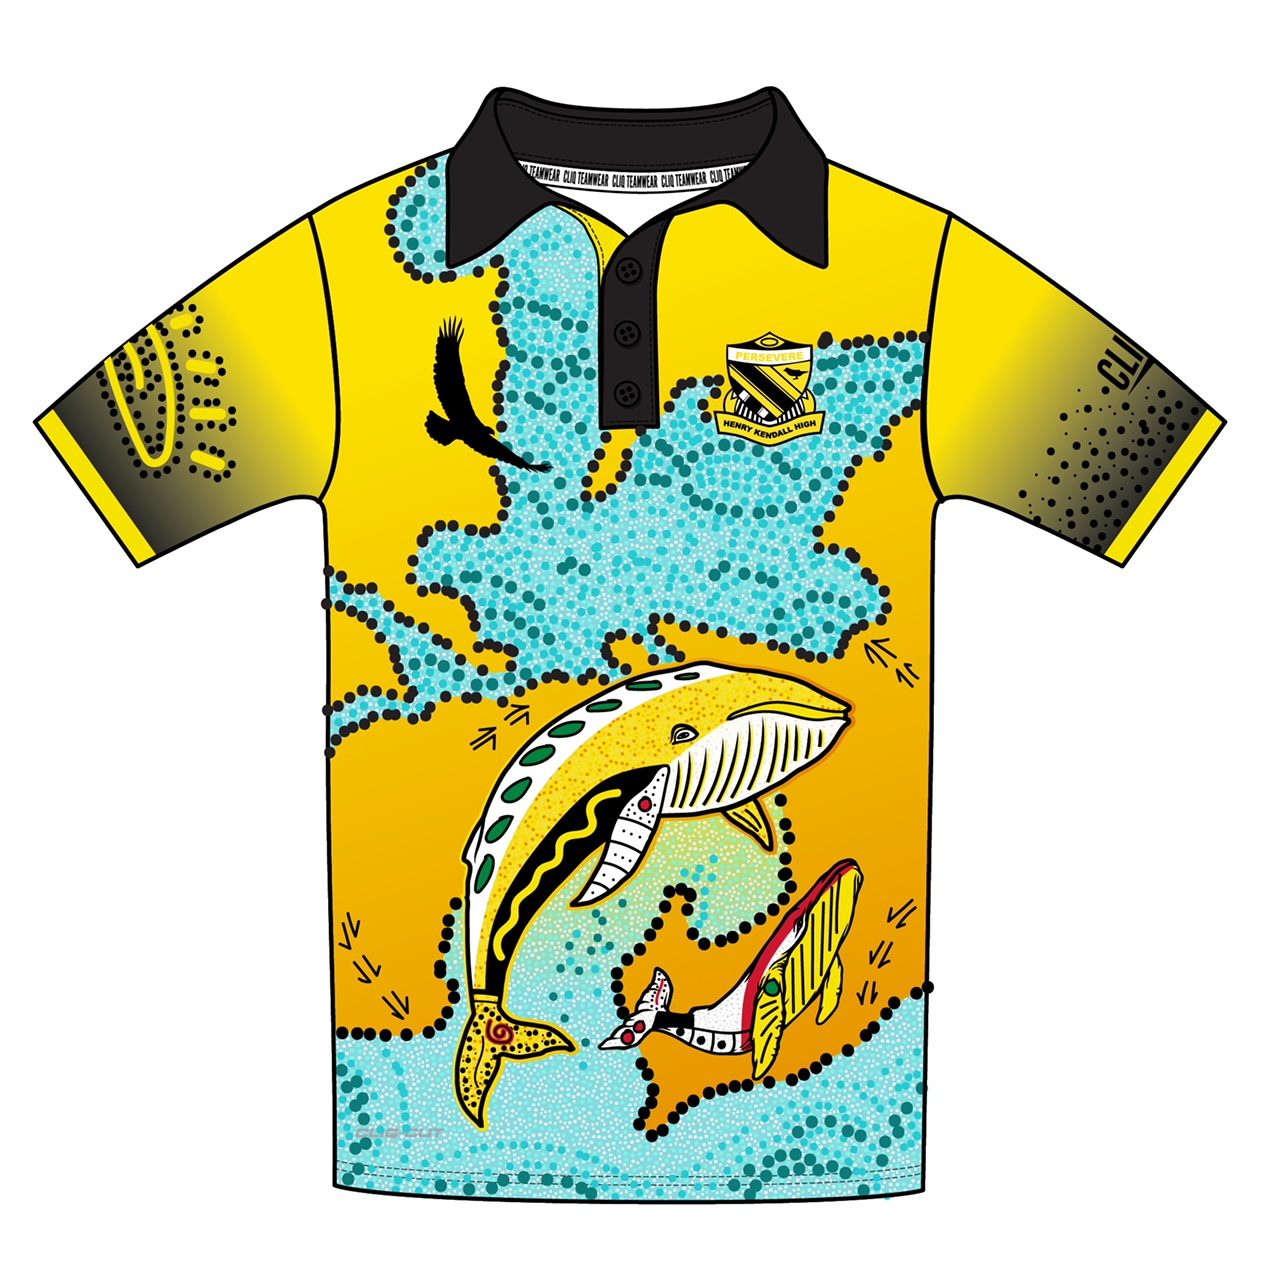 HENRY KENDALL INDIGENOUS POLO WEB IMAGES 01